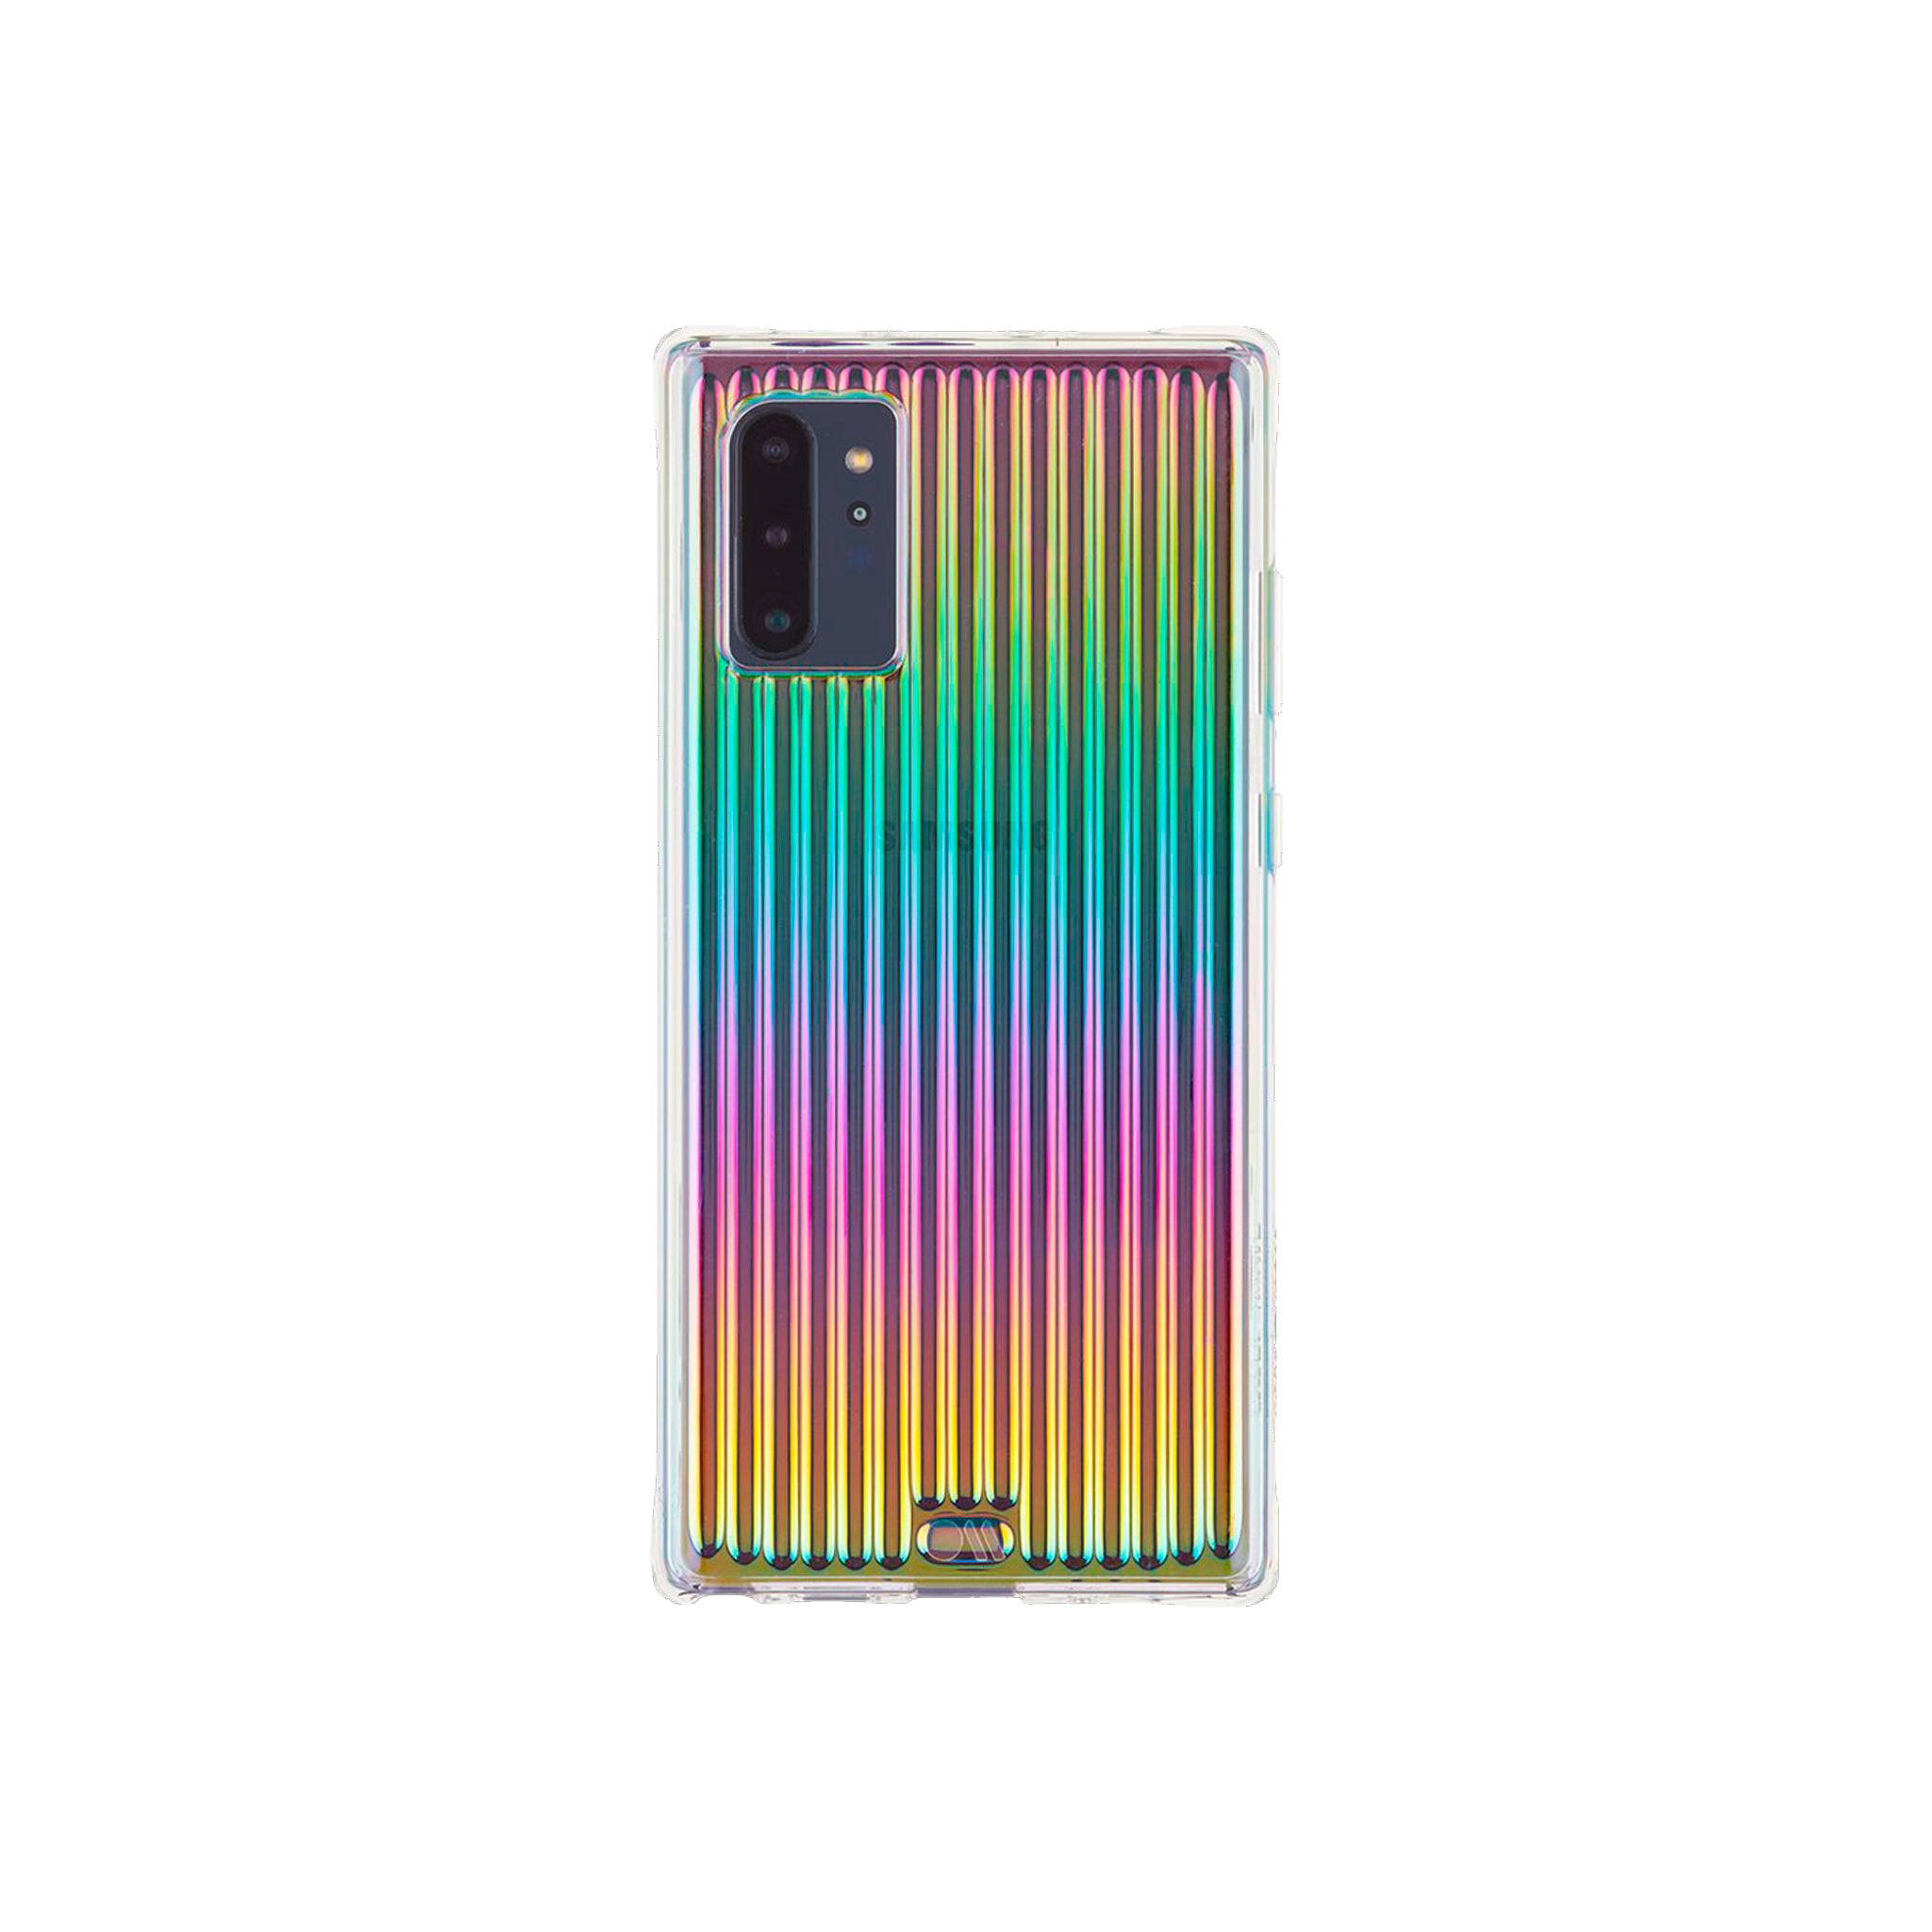 Case-mate - Tough Groove Case For Samsung Galaxy Note10 Plus - Iridescent